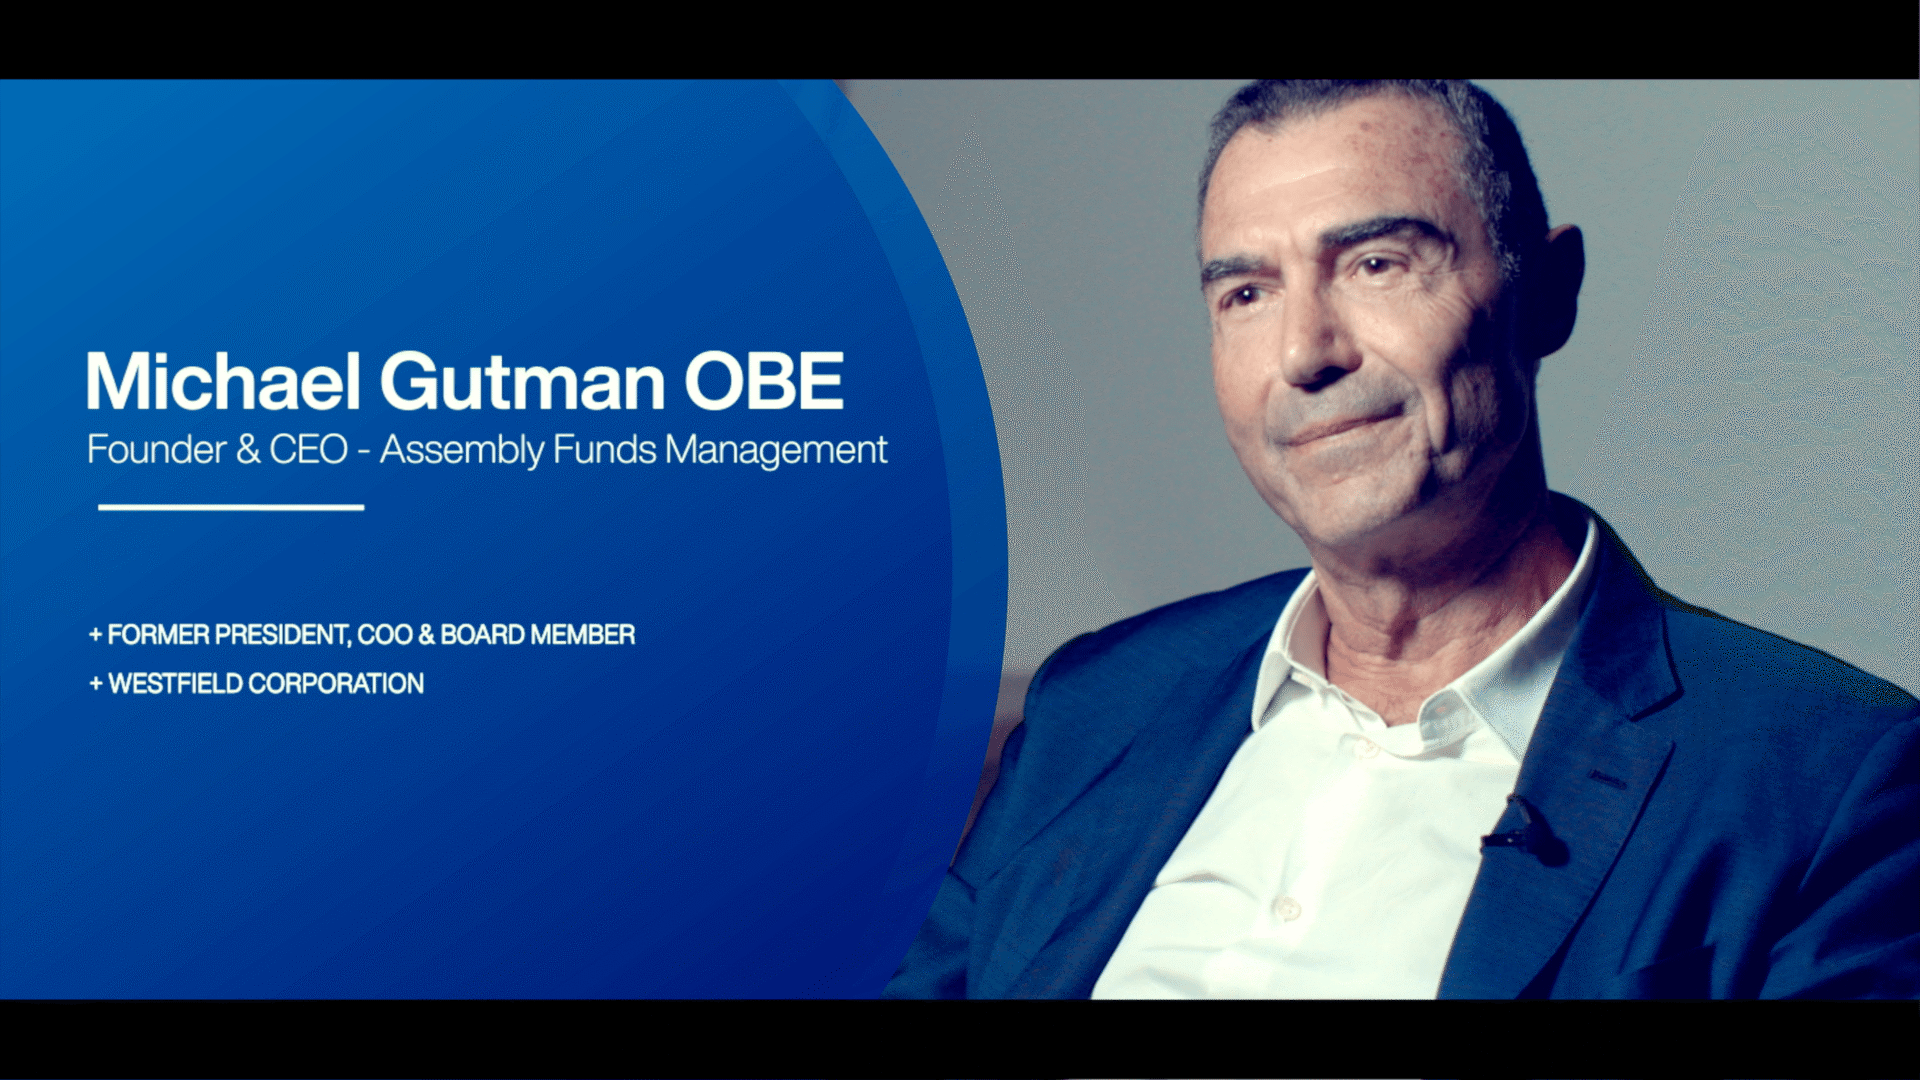 Michael Gutman OBE - Assembly Funds Management